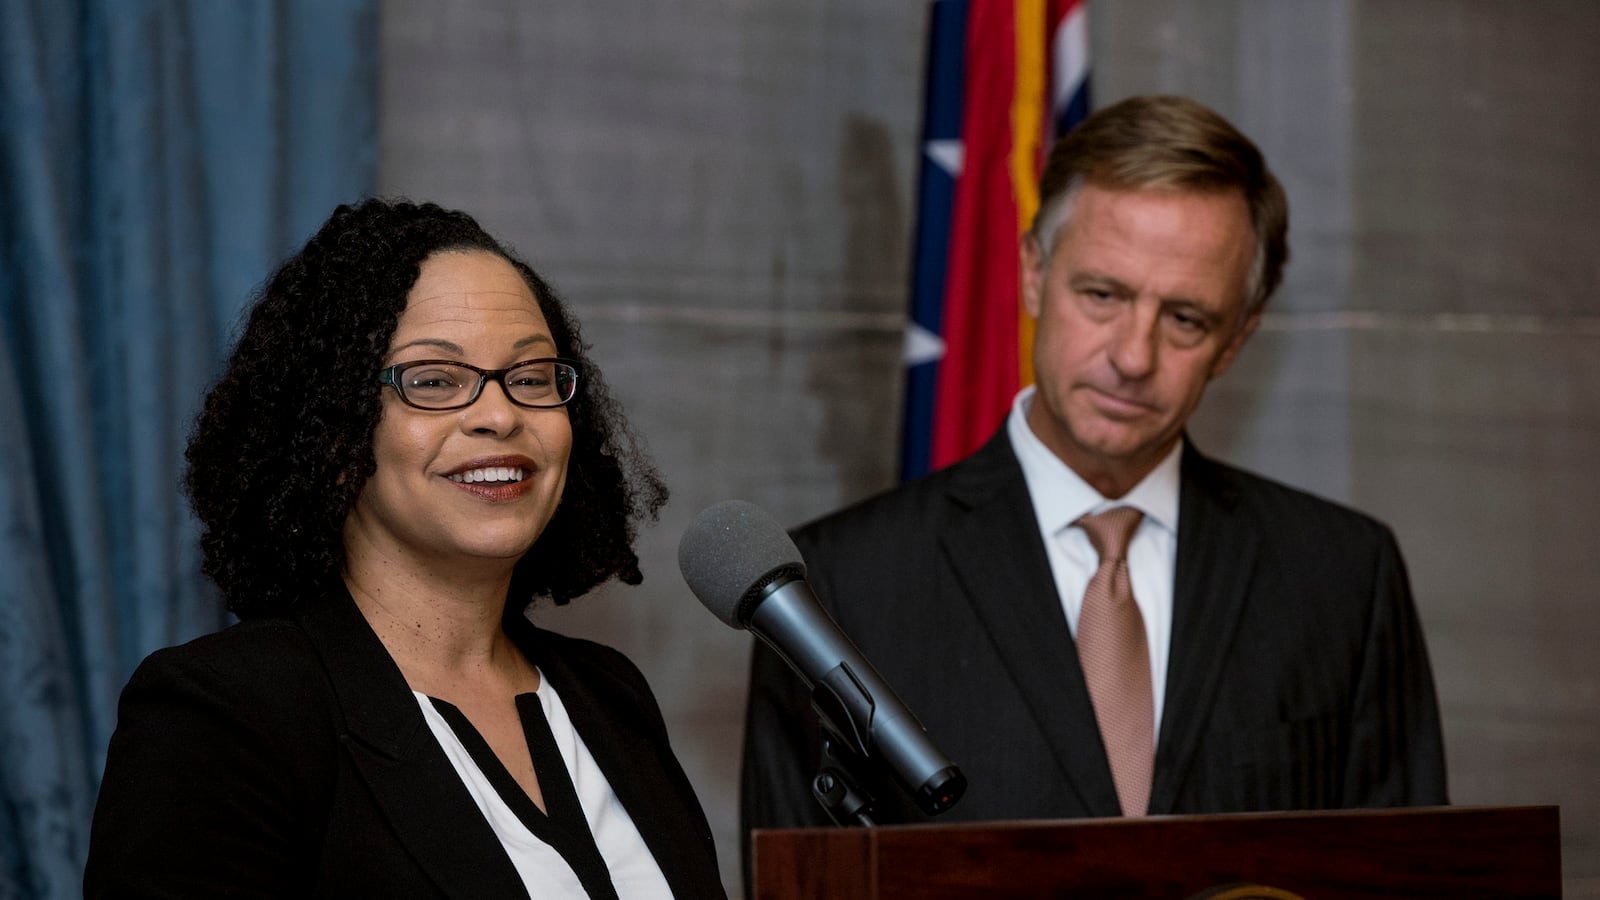 Malika Anderson became superintendent of the state-run Achievement School District in 2016 under the leadership of Gov. Bill Haslam.